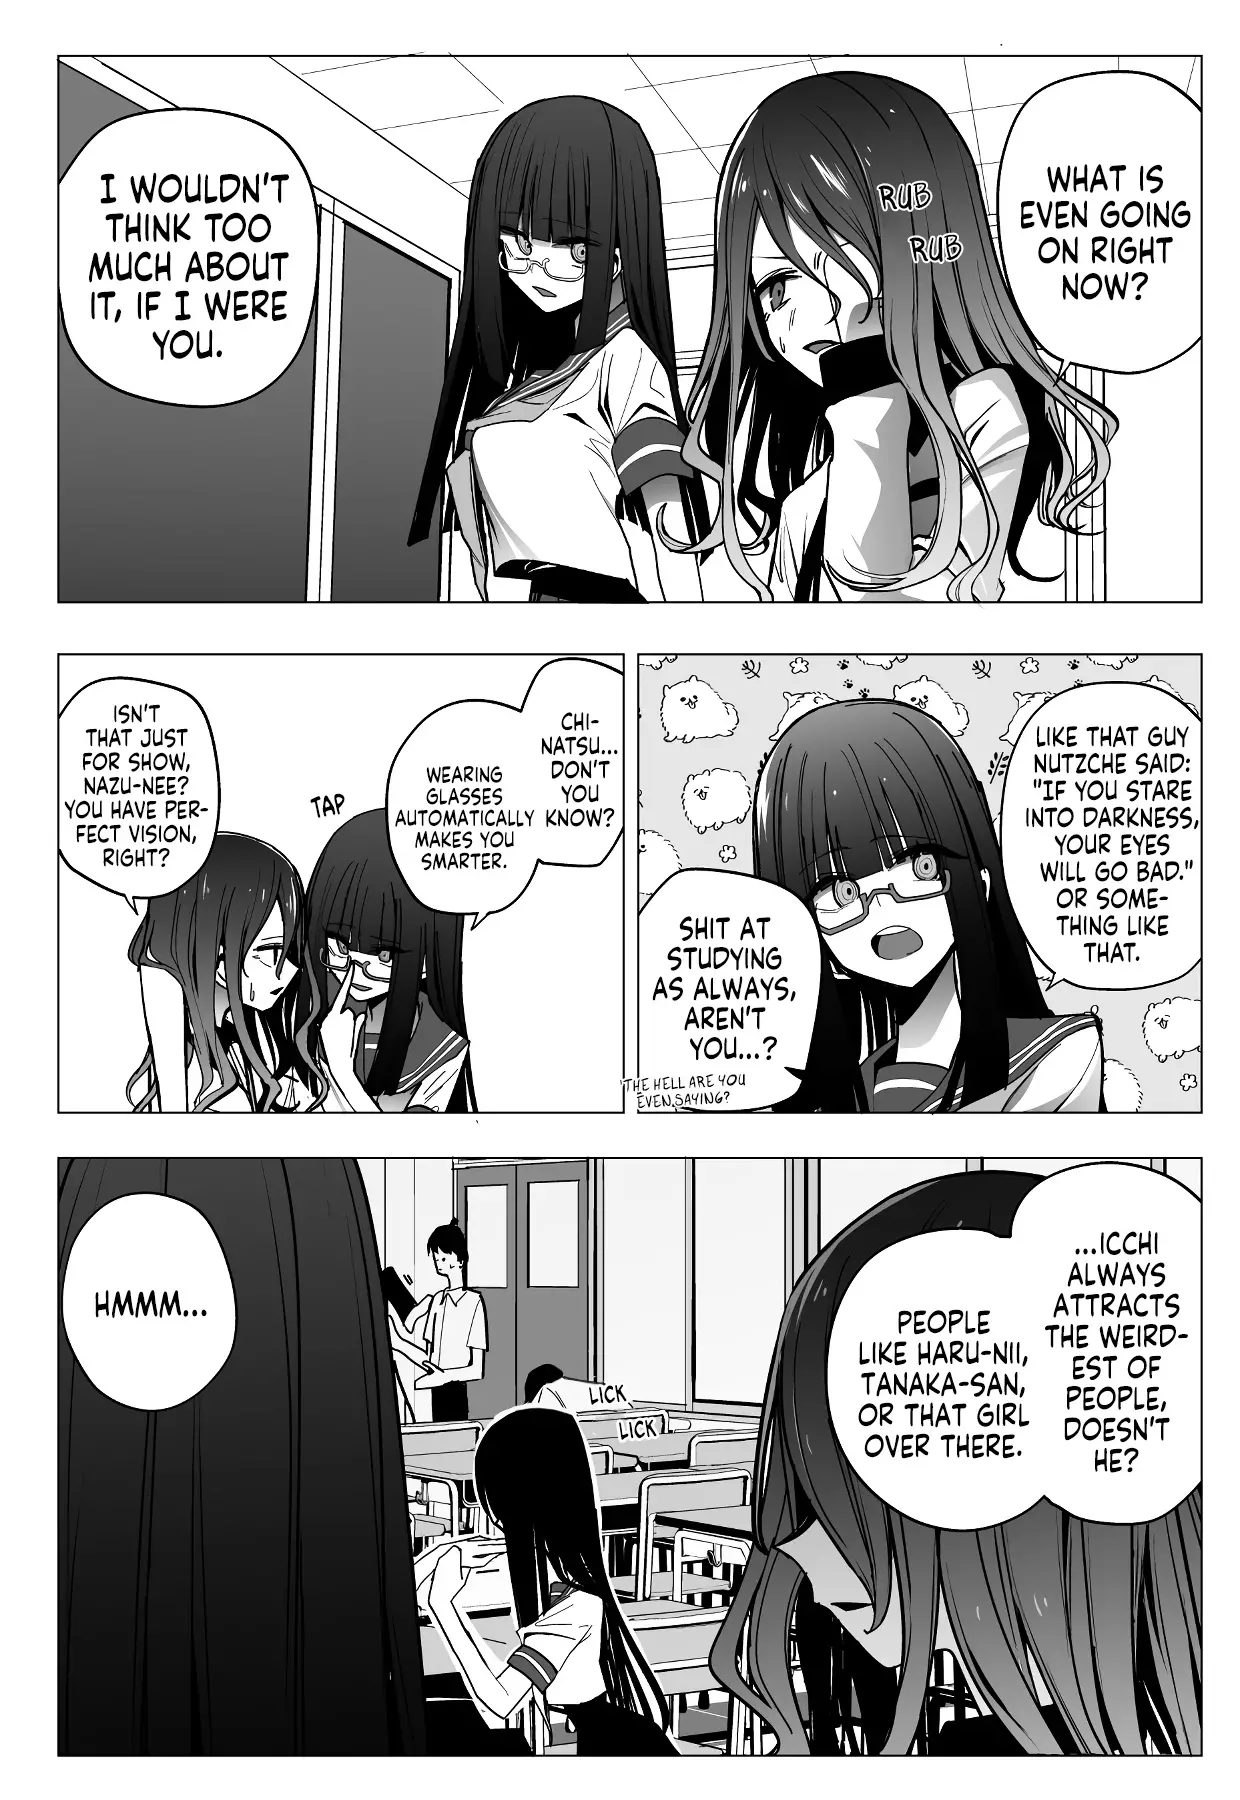 Mitsuishi-San Is Being Weird This Year - 24 page 16-4c090057